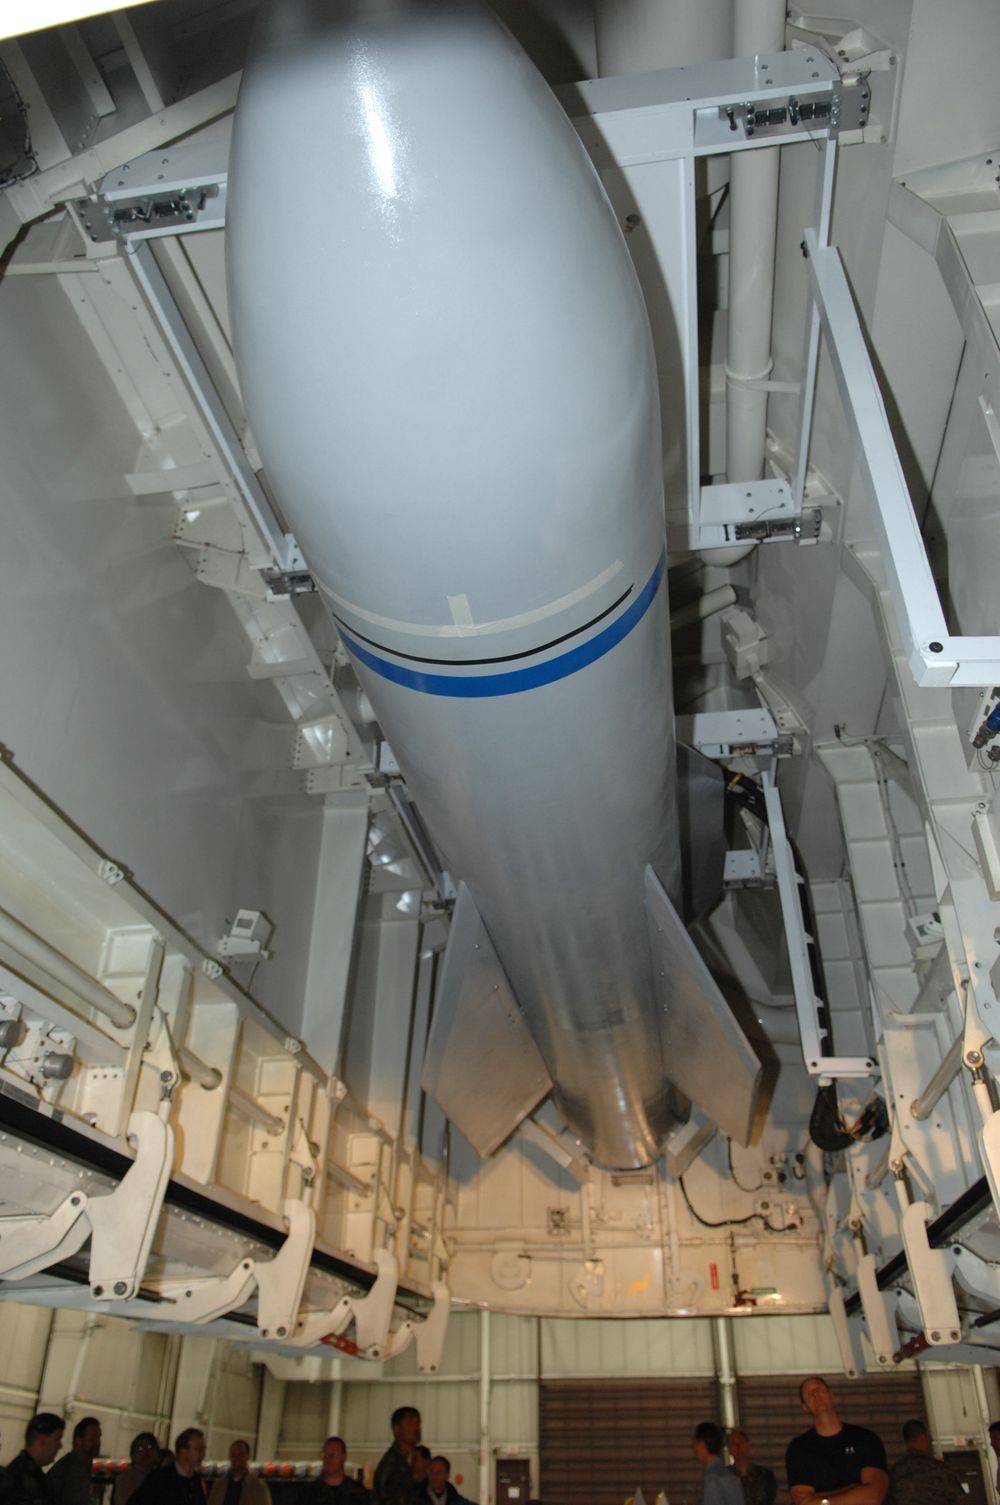 A mock-up of the Massive Ordnance Penetrator sits in the bomb bay of the B-2 weapons load trainer on December 18, 2007, at Whitman Air Force Base, Missouri.